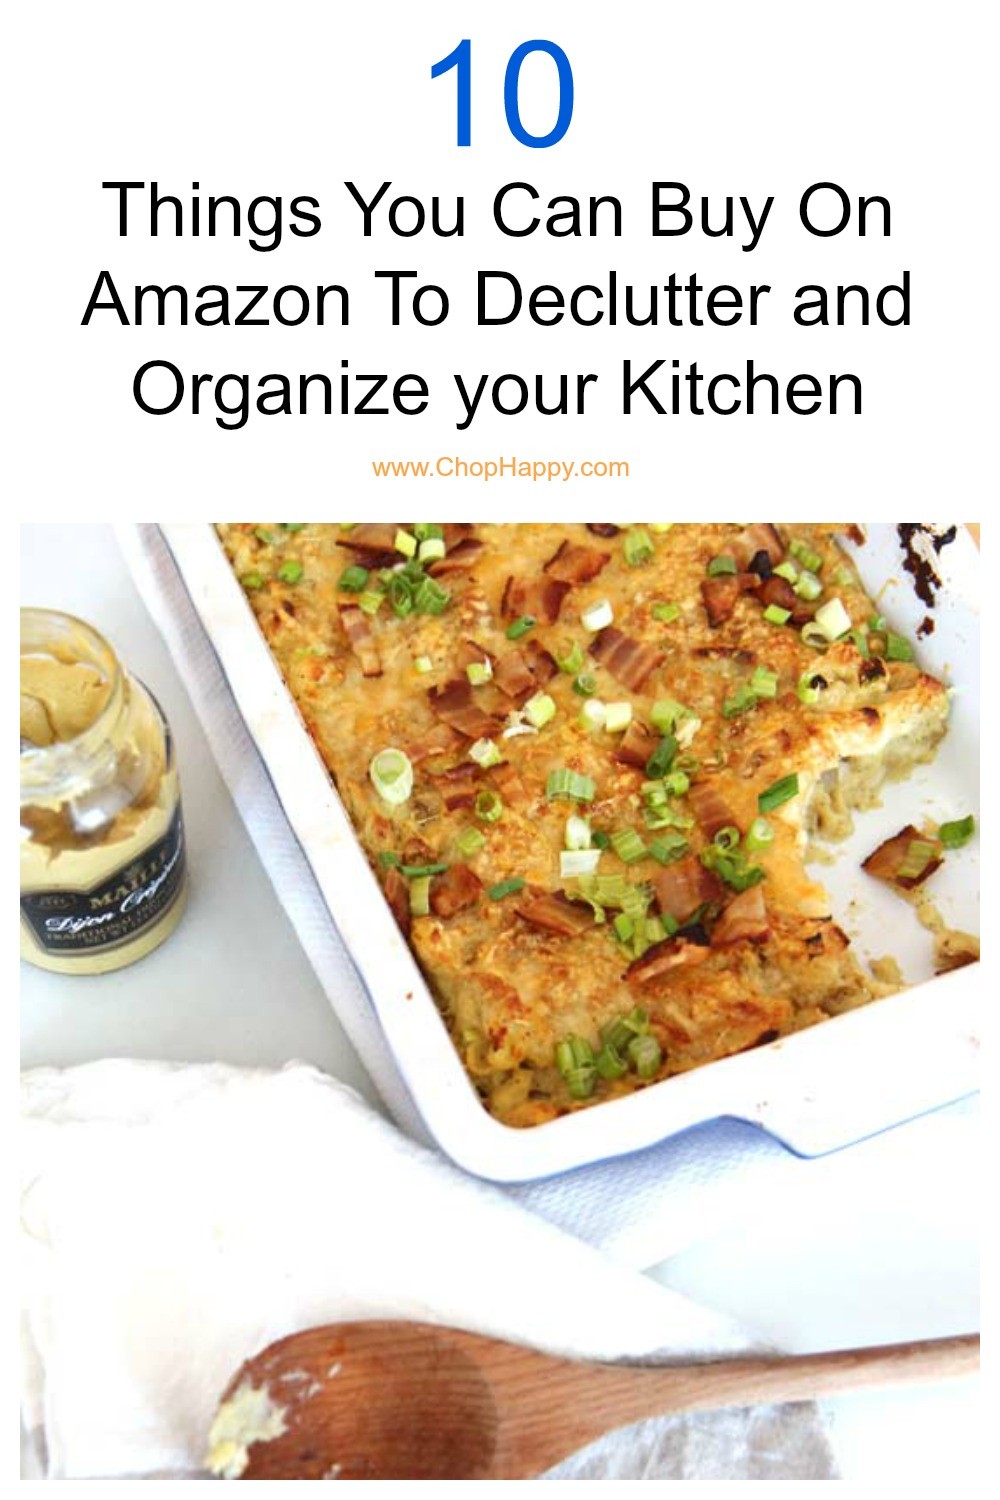 10 Things You Can Buy On Amazon To Declutter and Organize your Kitchen #organize #declutter